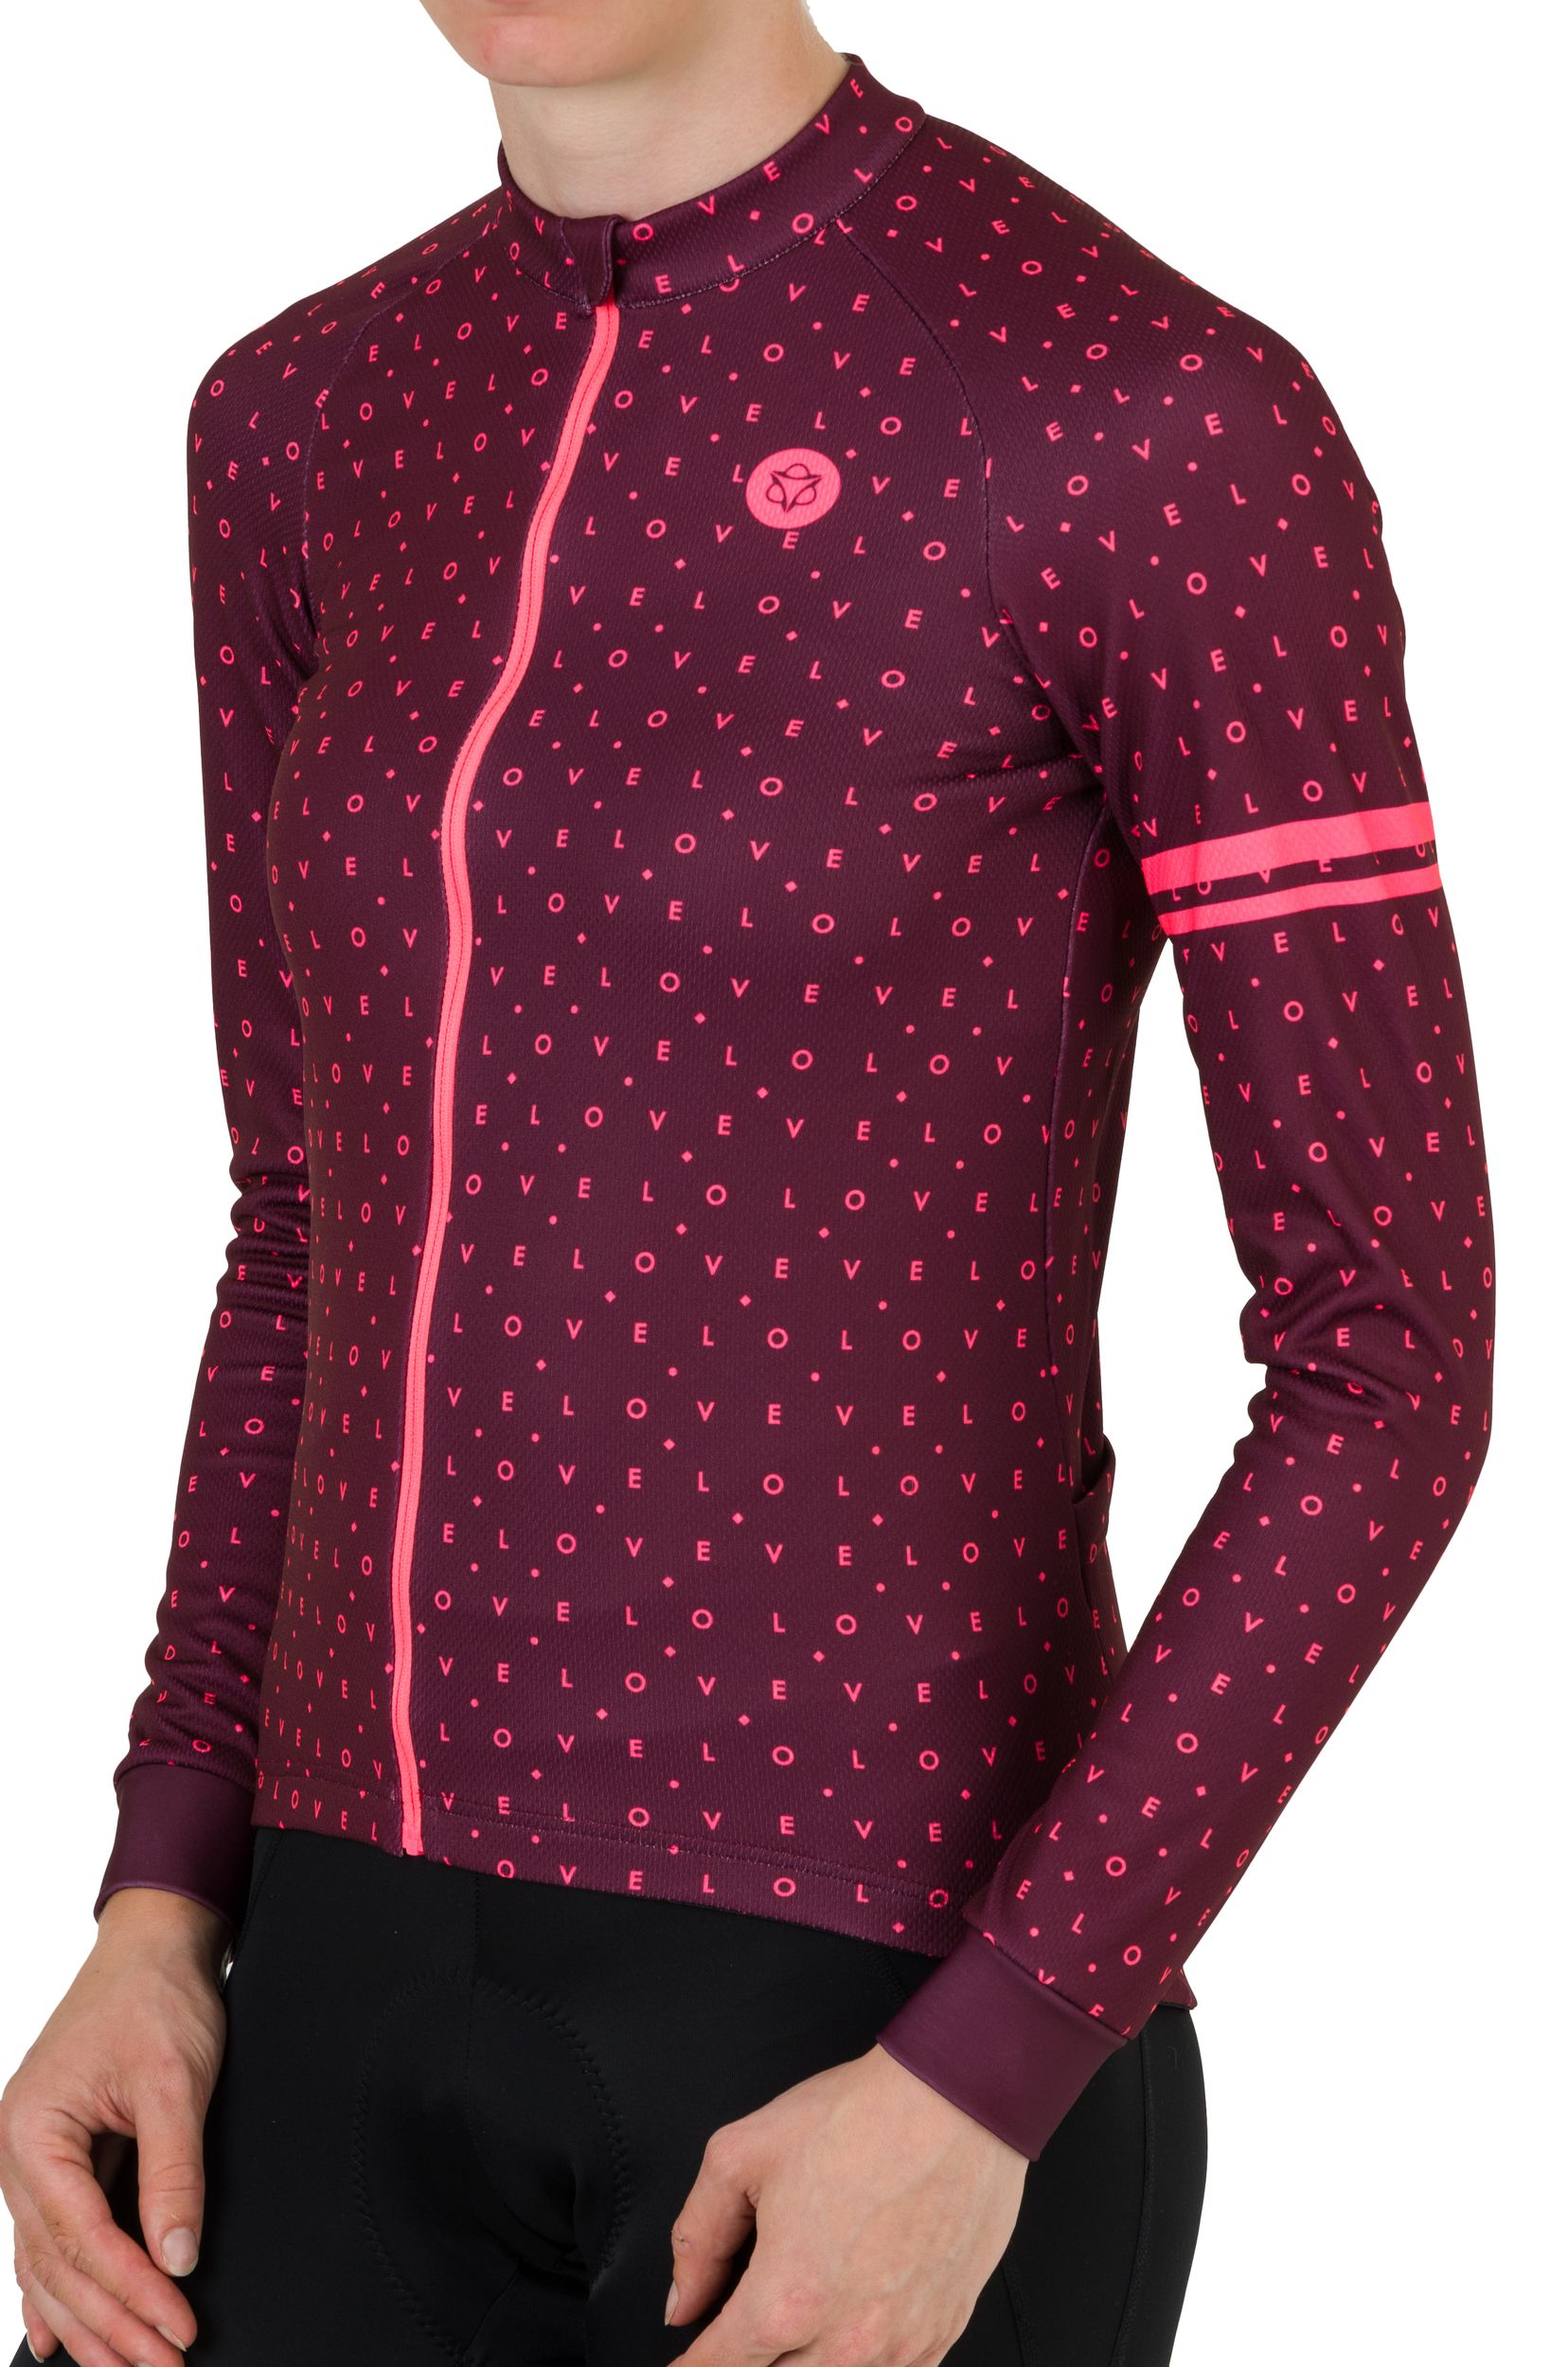 Velo Love Jersey LS Essential Women fit example